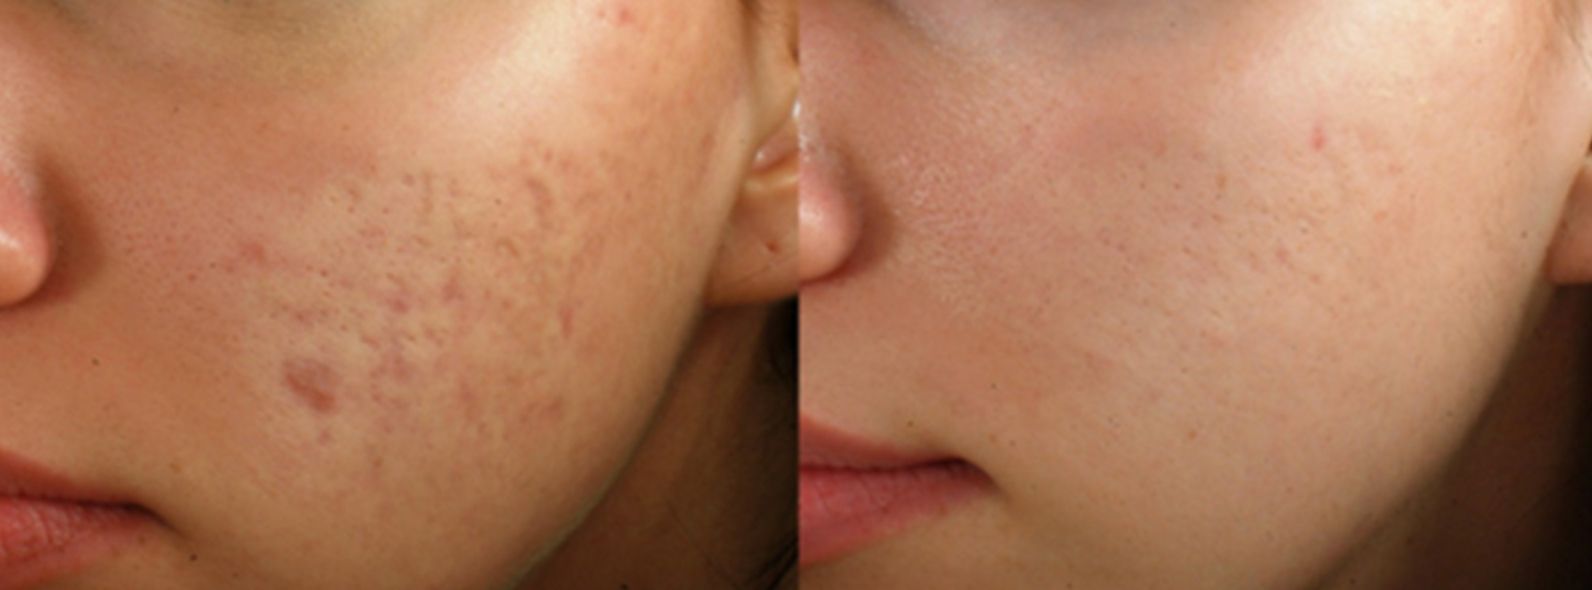 Female patient's face before and after Microneedling treatment